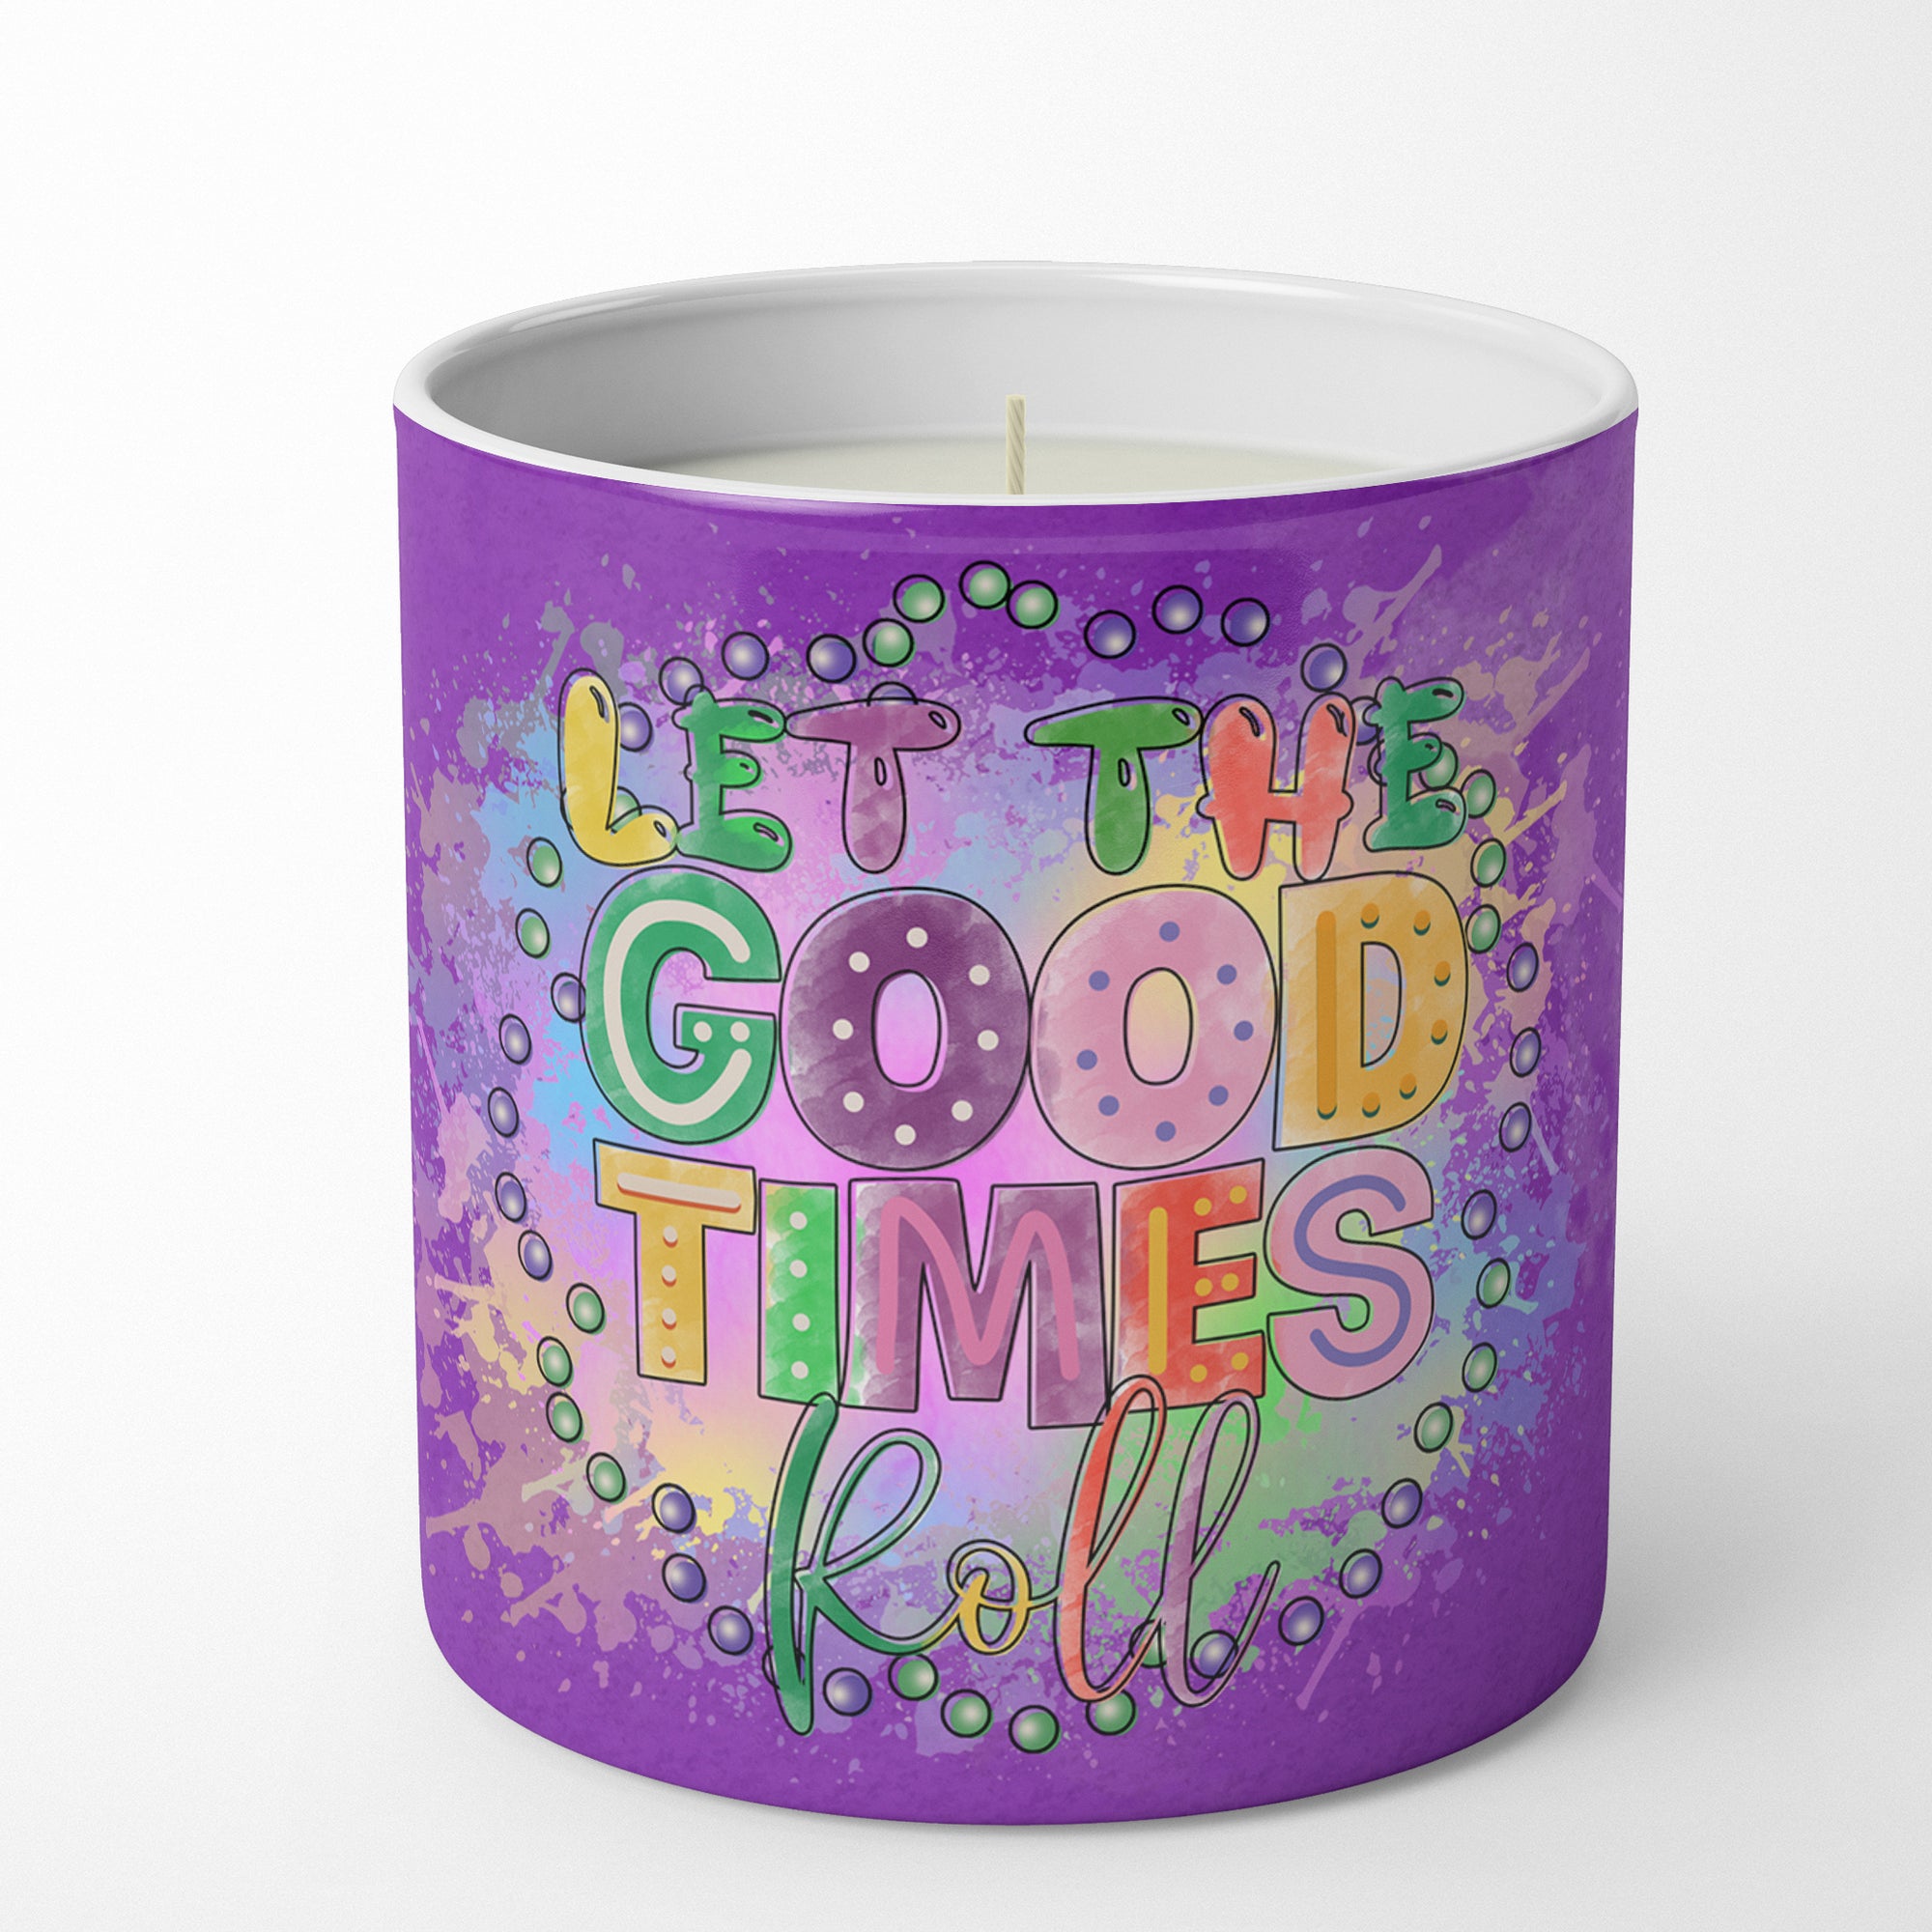 Buy this Let the Good Times Roll Mardi Gras 10 oz Decorative Soy Candle